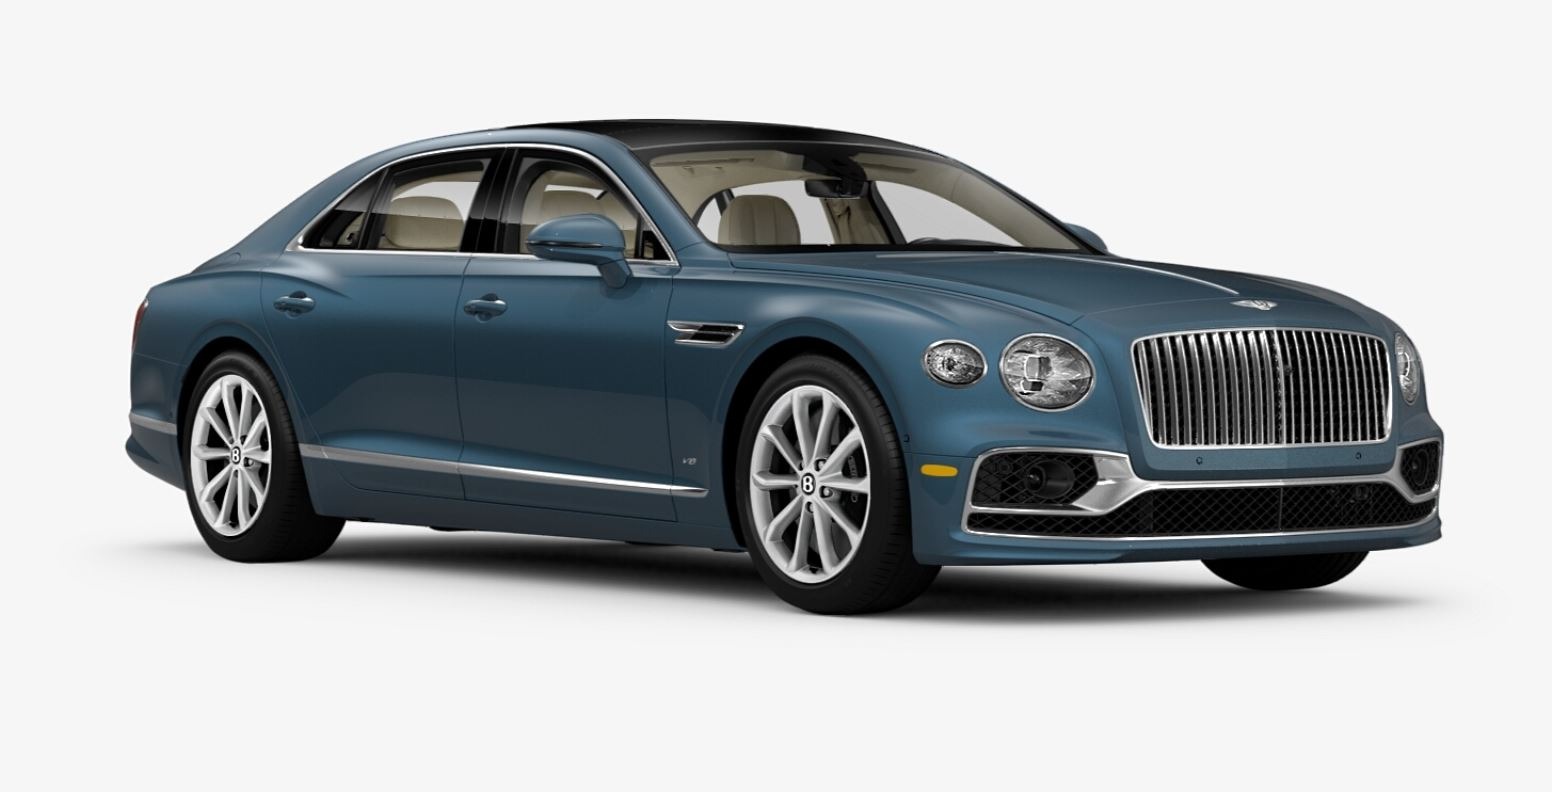 New 2021 Bentley Flying Spur V8 for sale Sold at Rolls-Royce Motor Cars Greenwich in Greenwich CT 06830 1